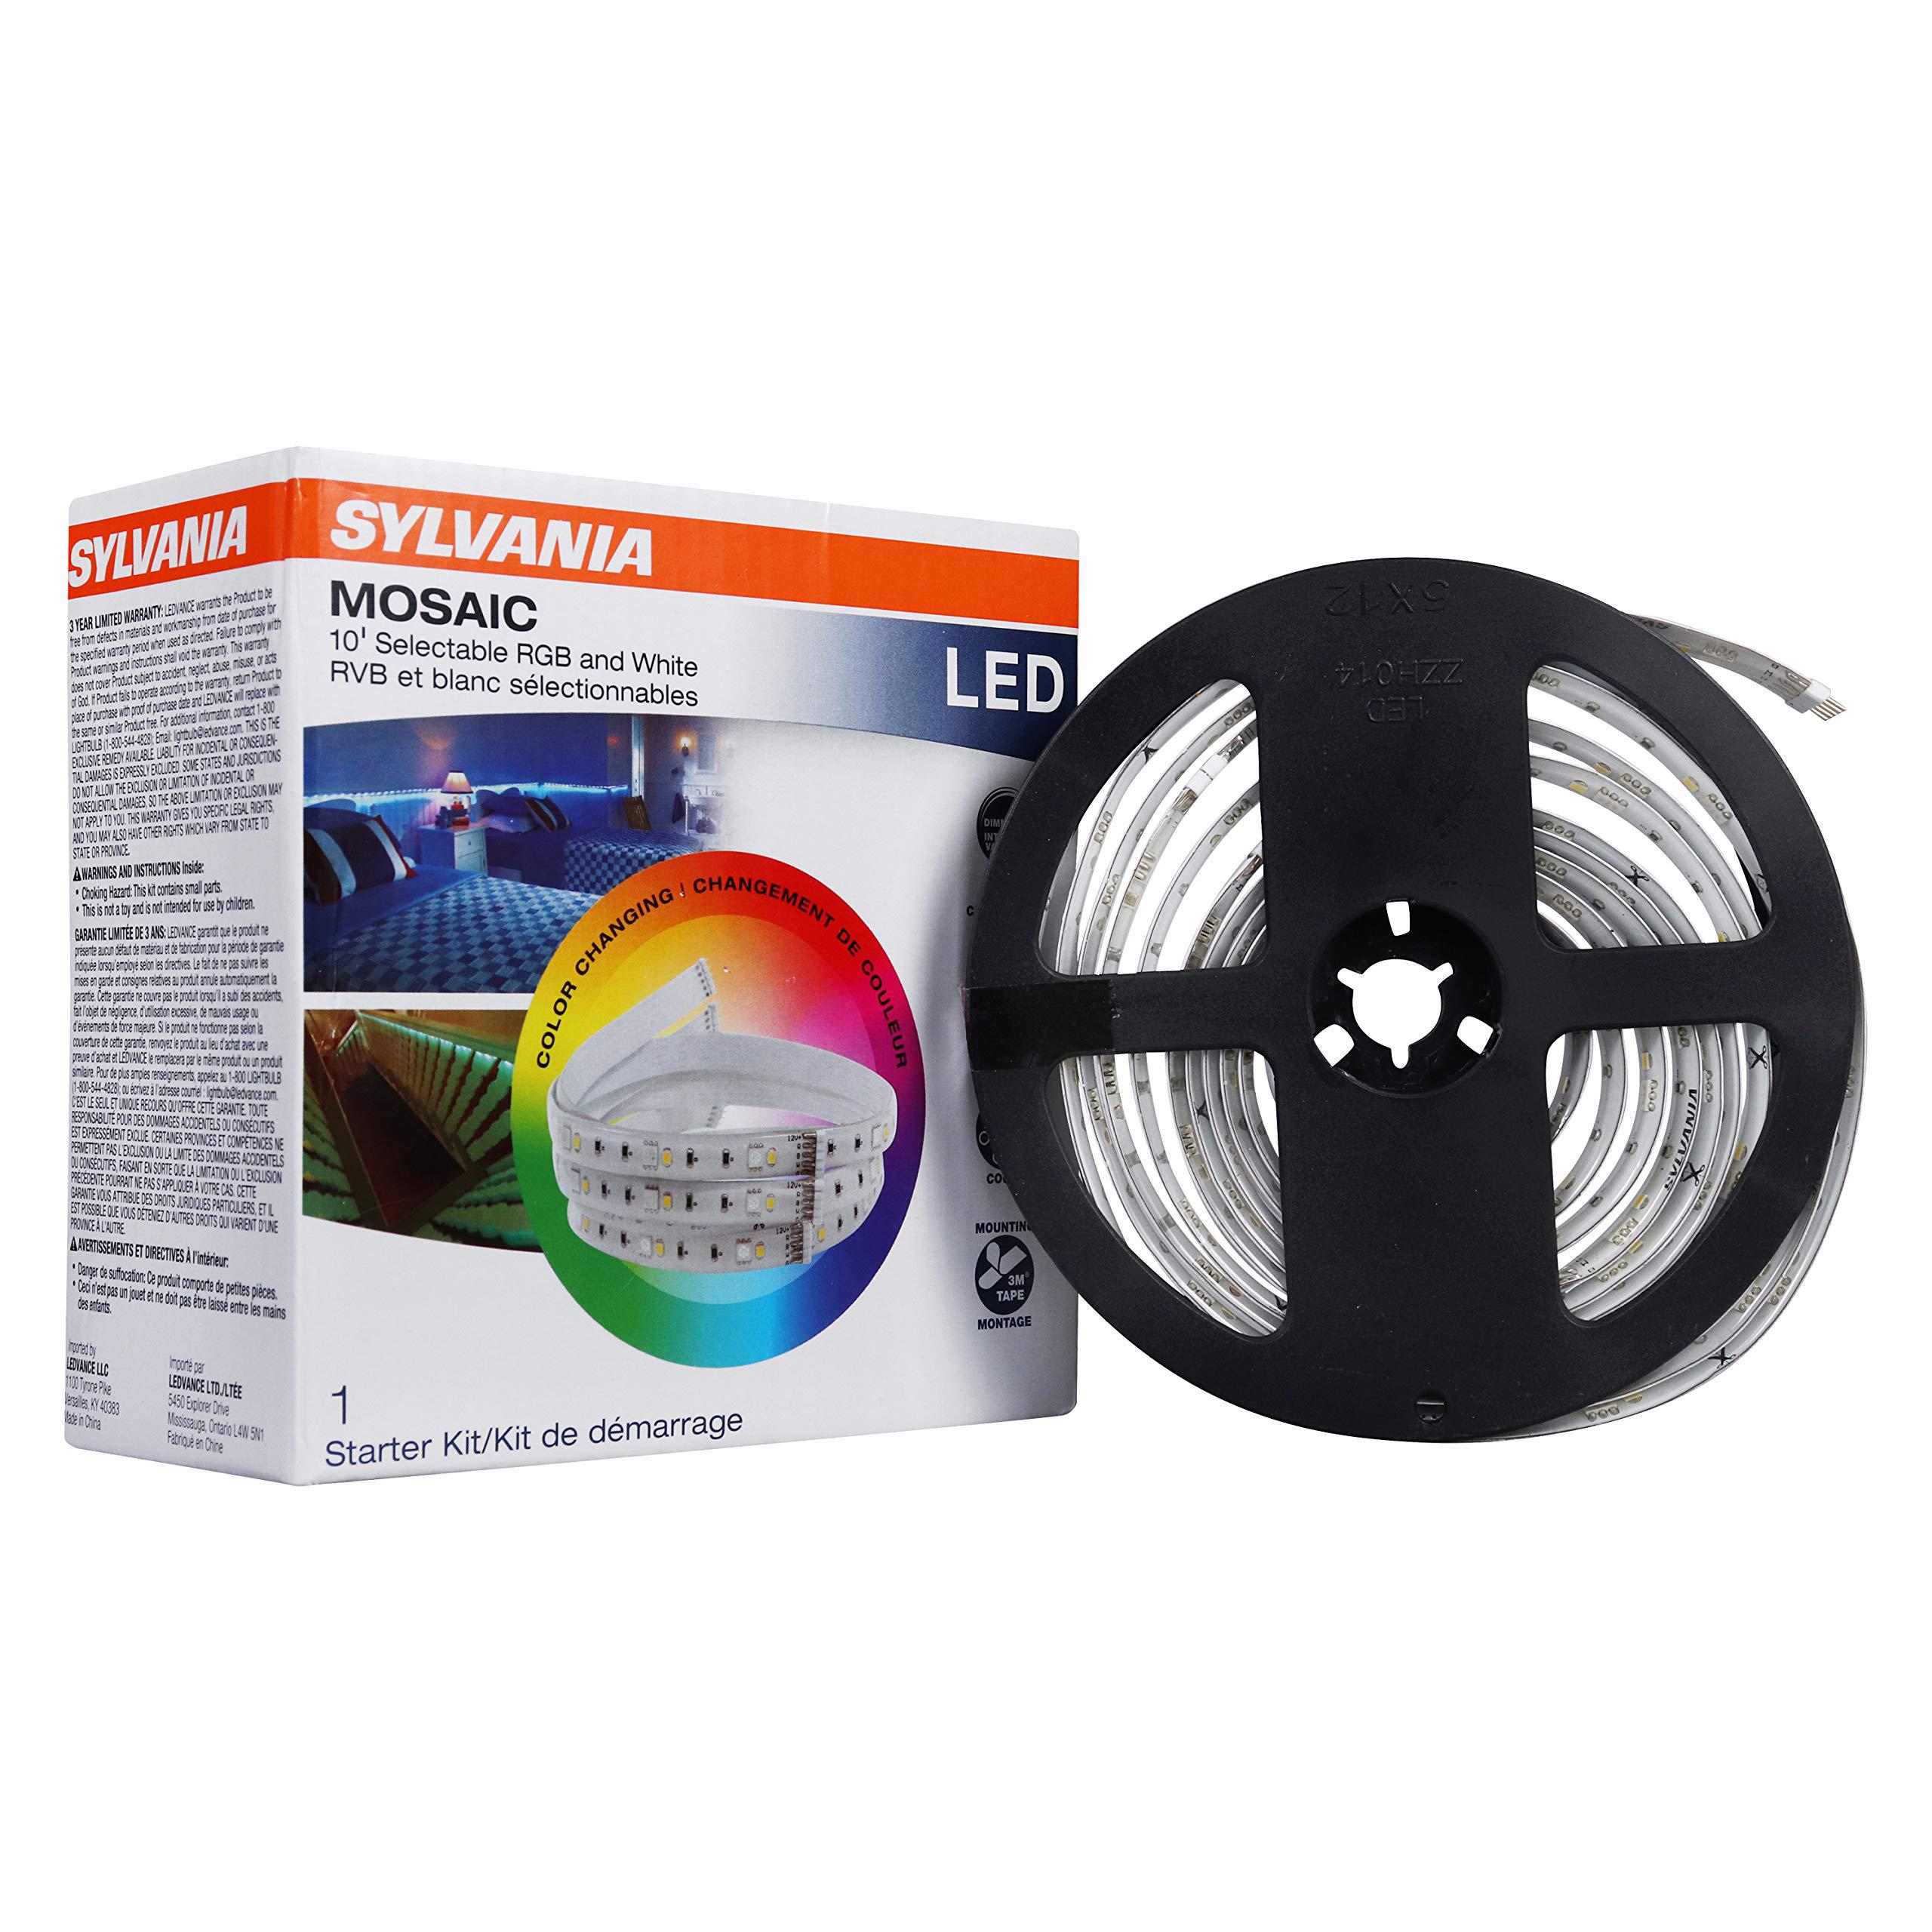 LEDVANCE sylvania led remote control mosaic flexible light strip starter kit, 16 color options, dimmable, 10 feet - 1 pack (65482)